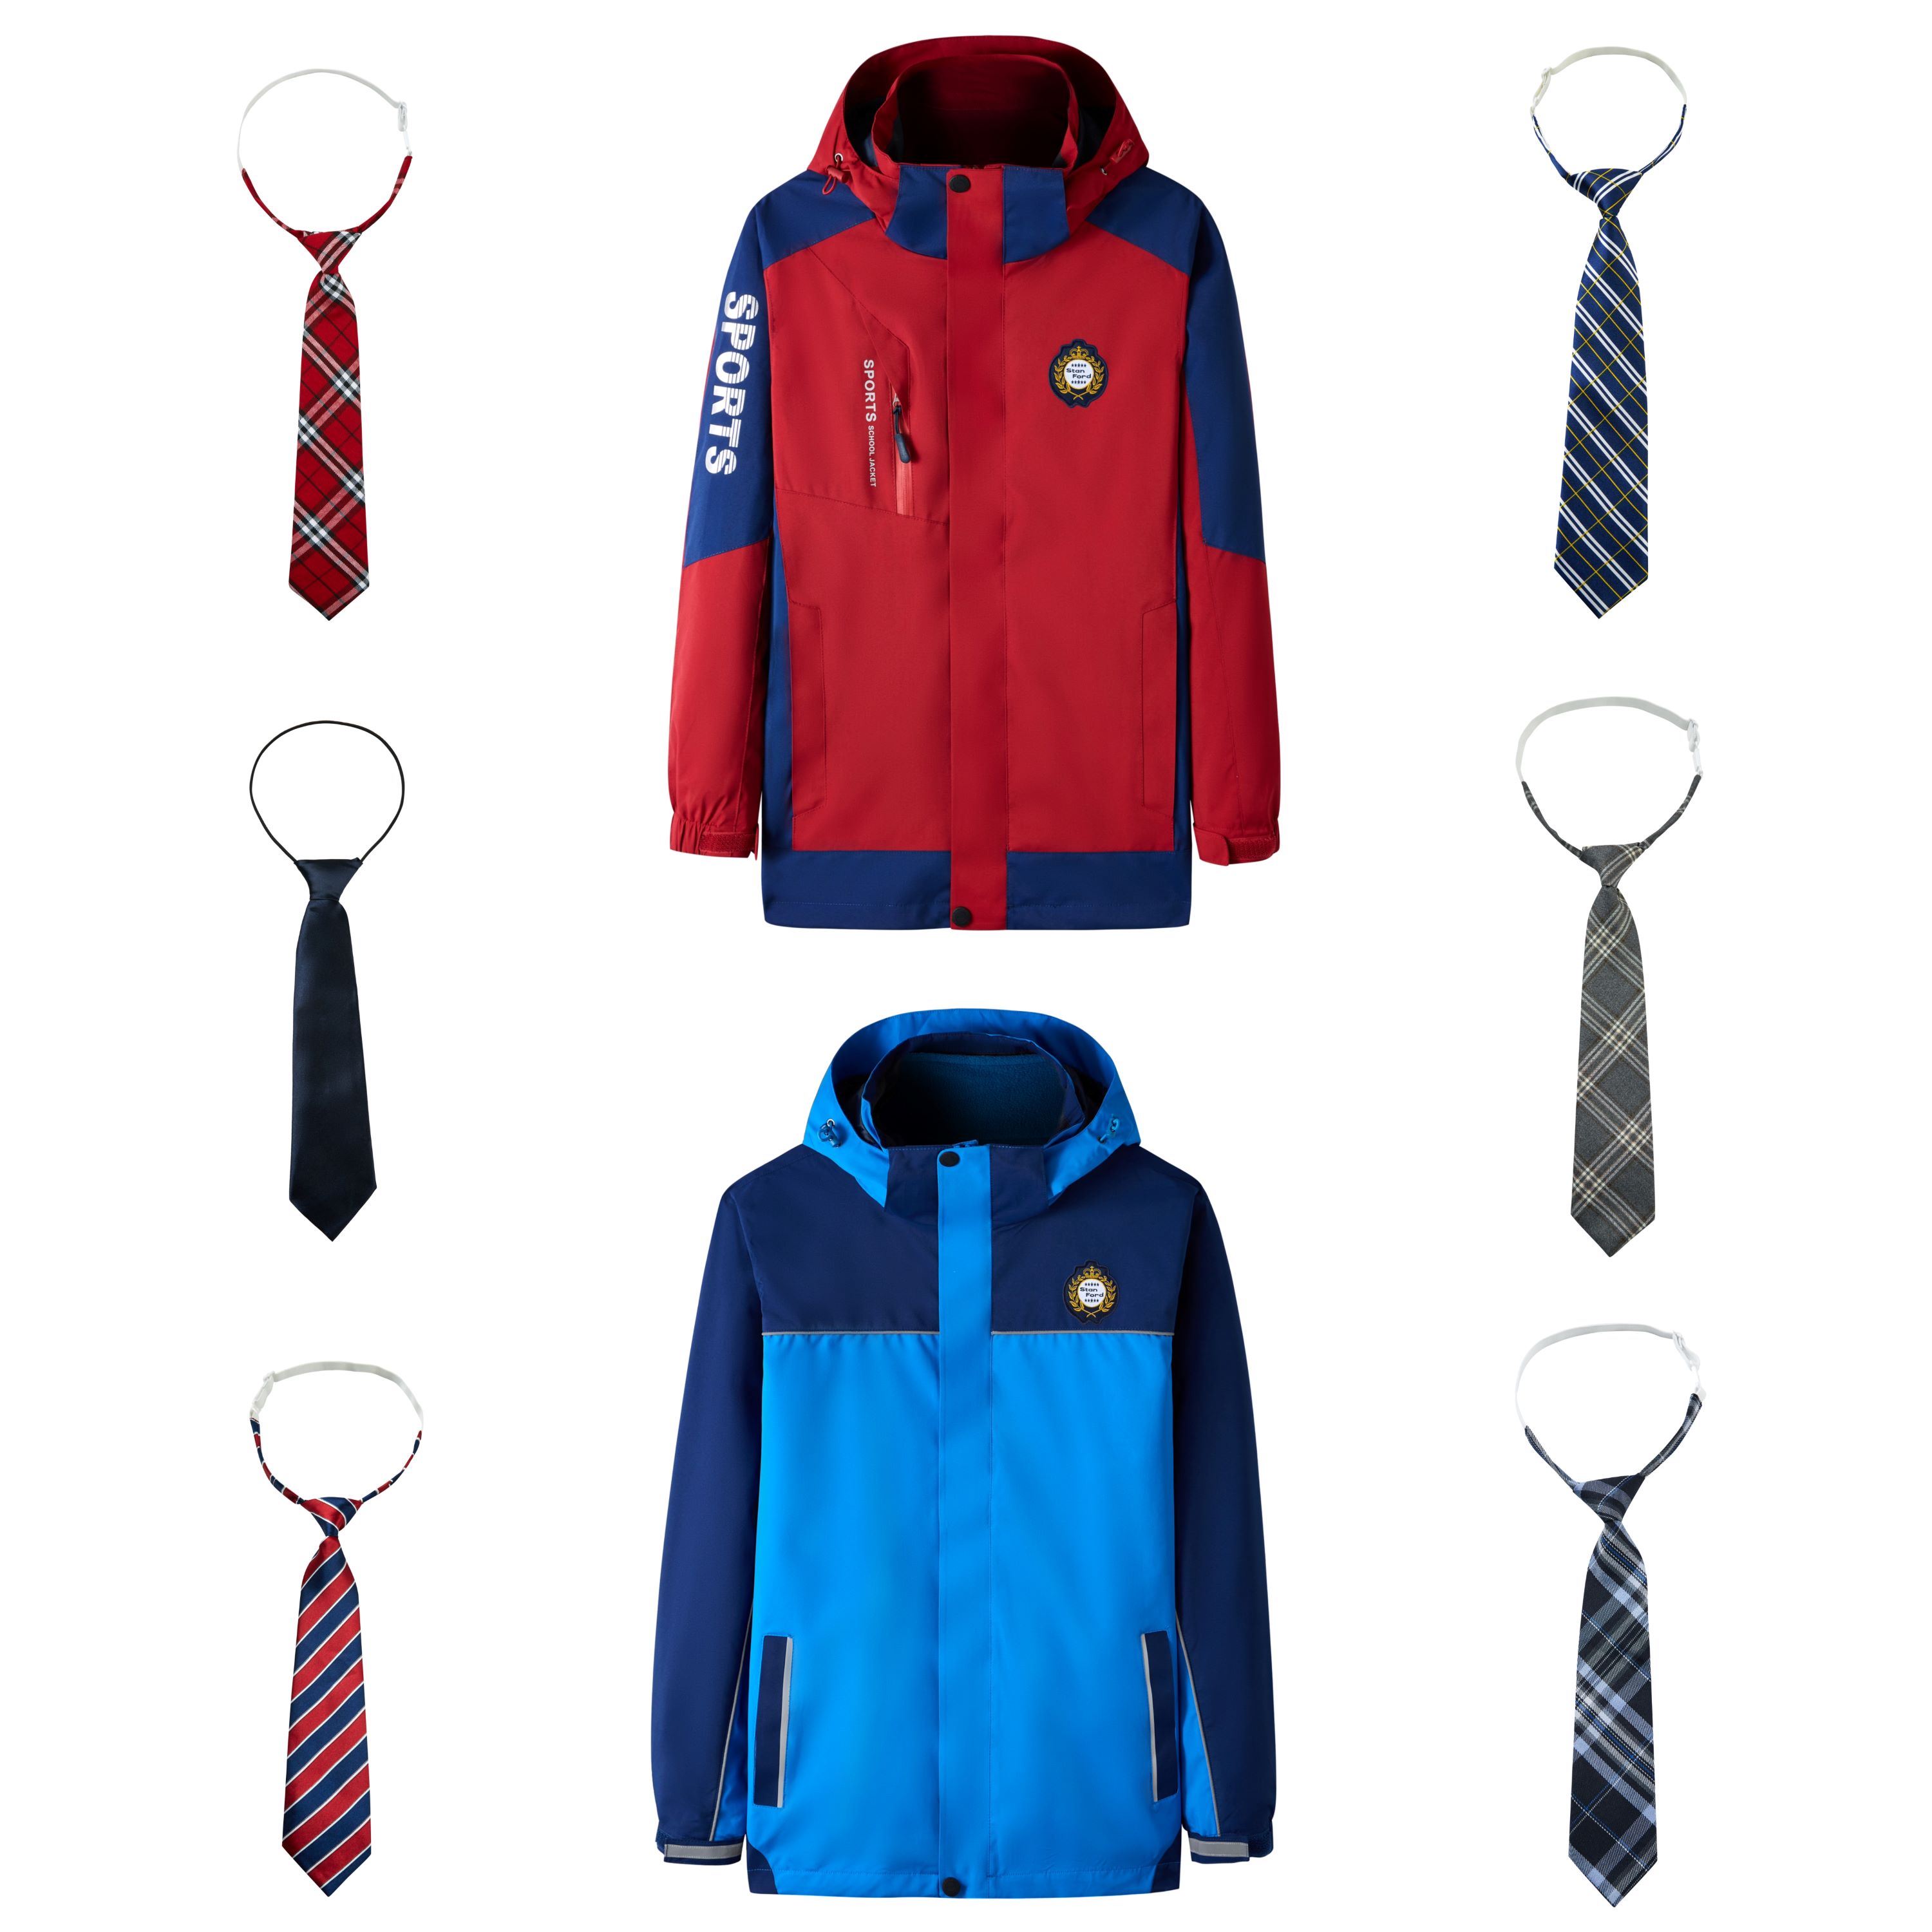 Literary school uniforms British school uniforms,clothing factory,can be customized 